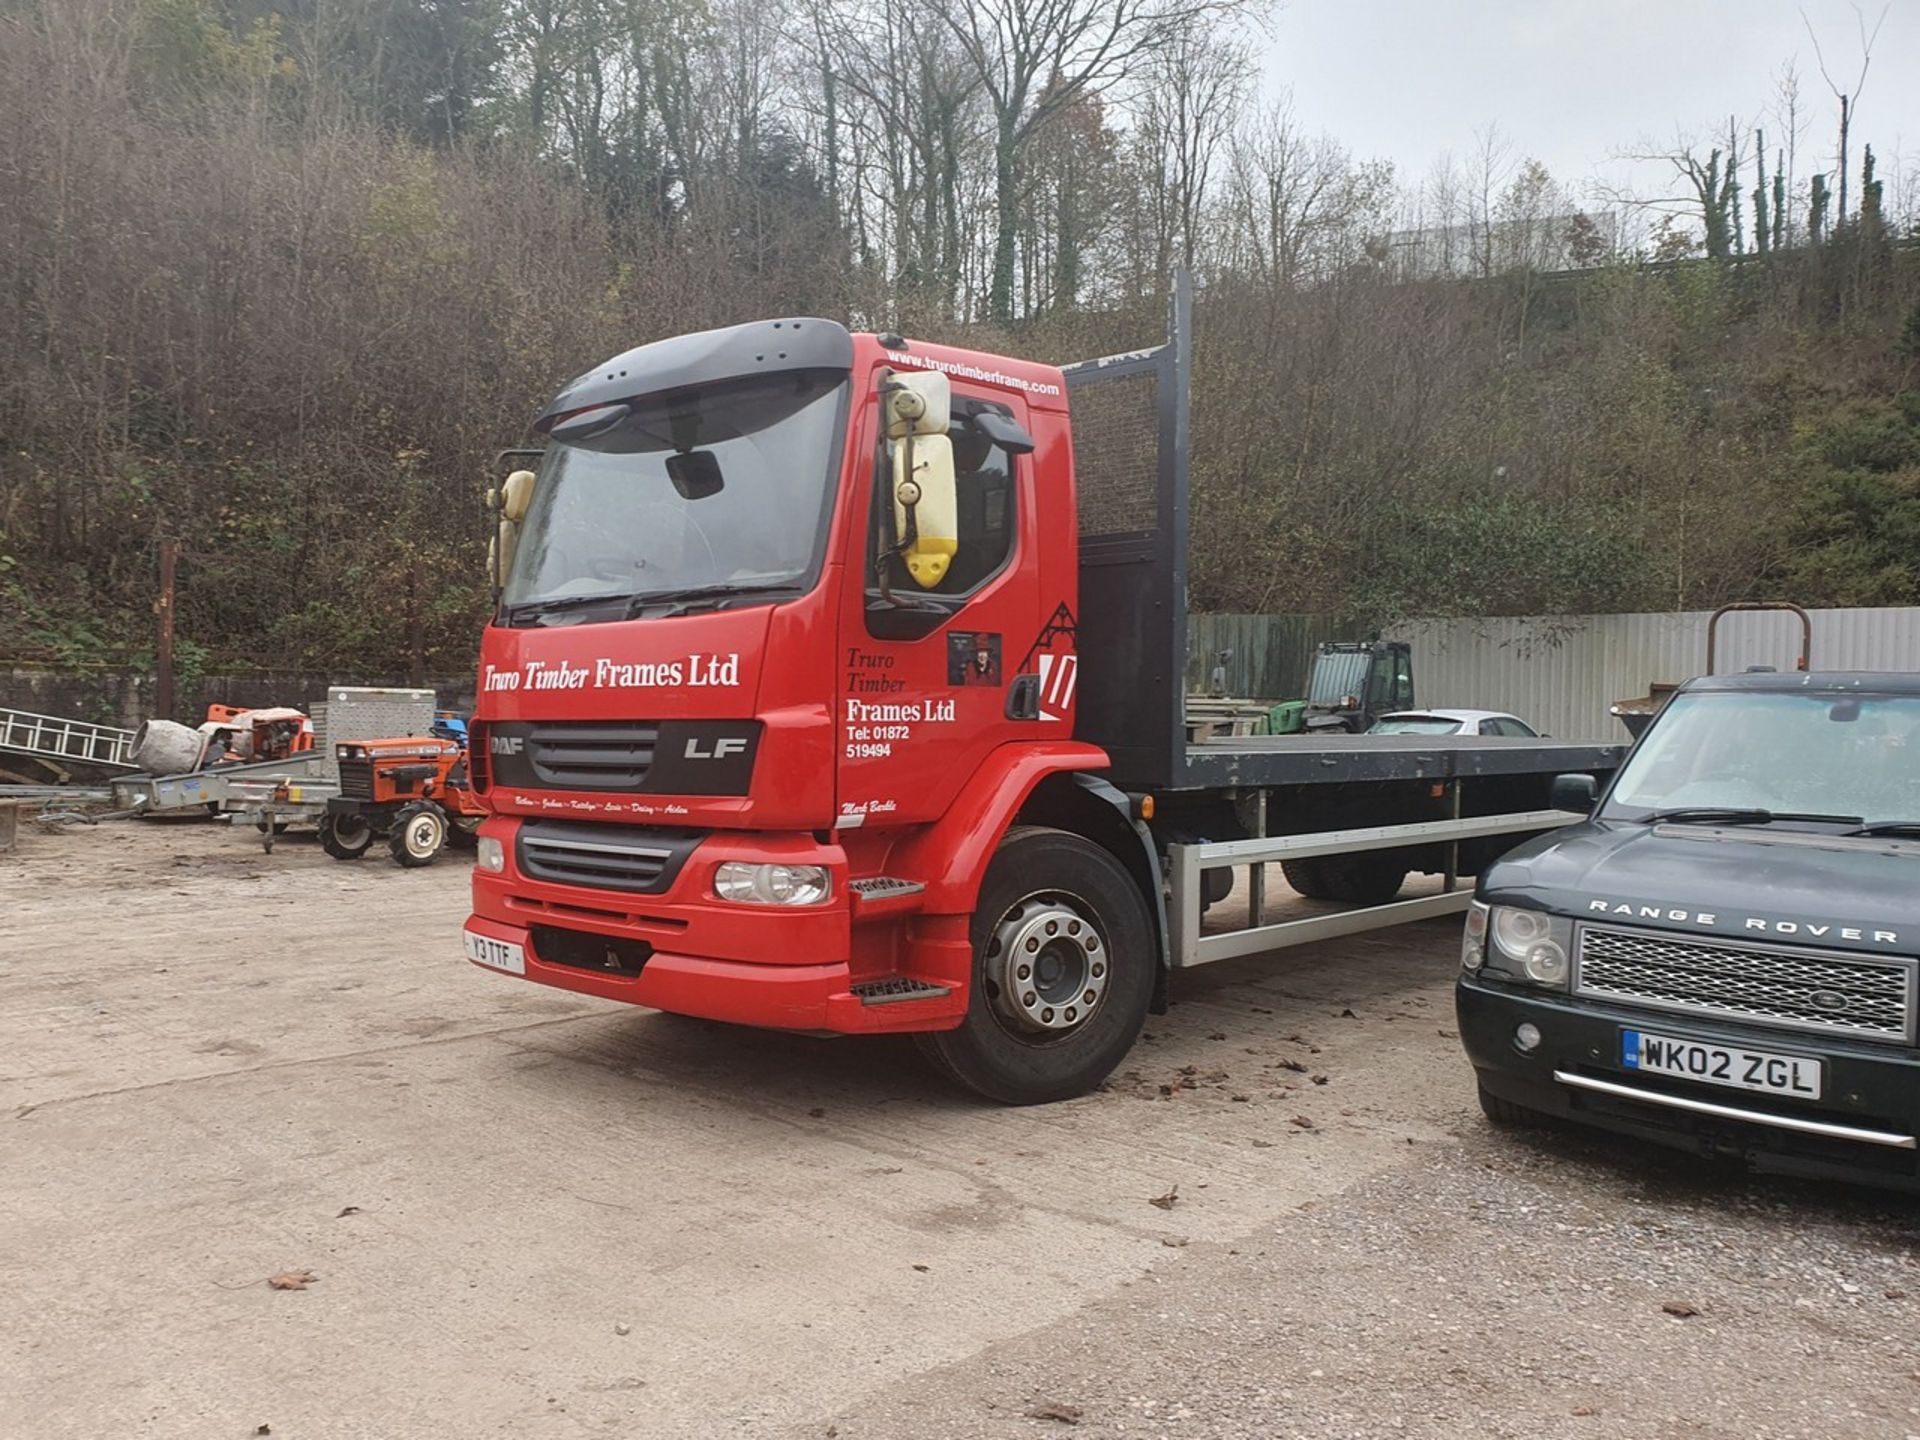 13/13 DAF TRUCKS FLAT BED - 6693cc 2dr (Red) - Image 17 of 23